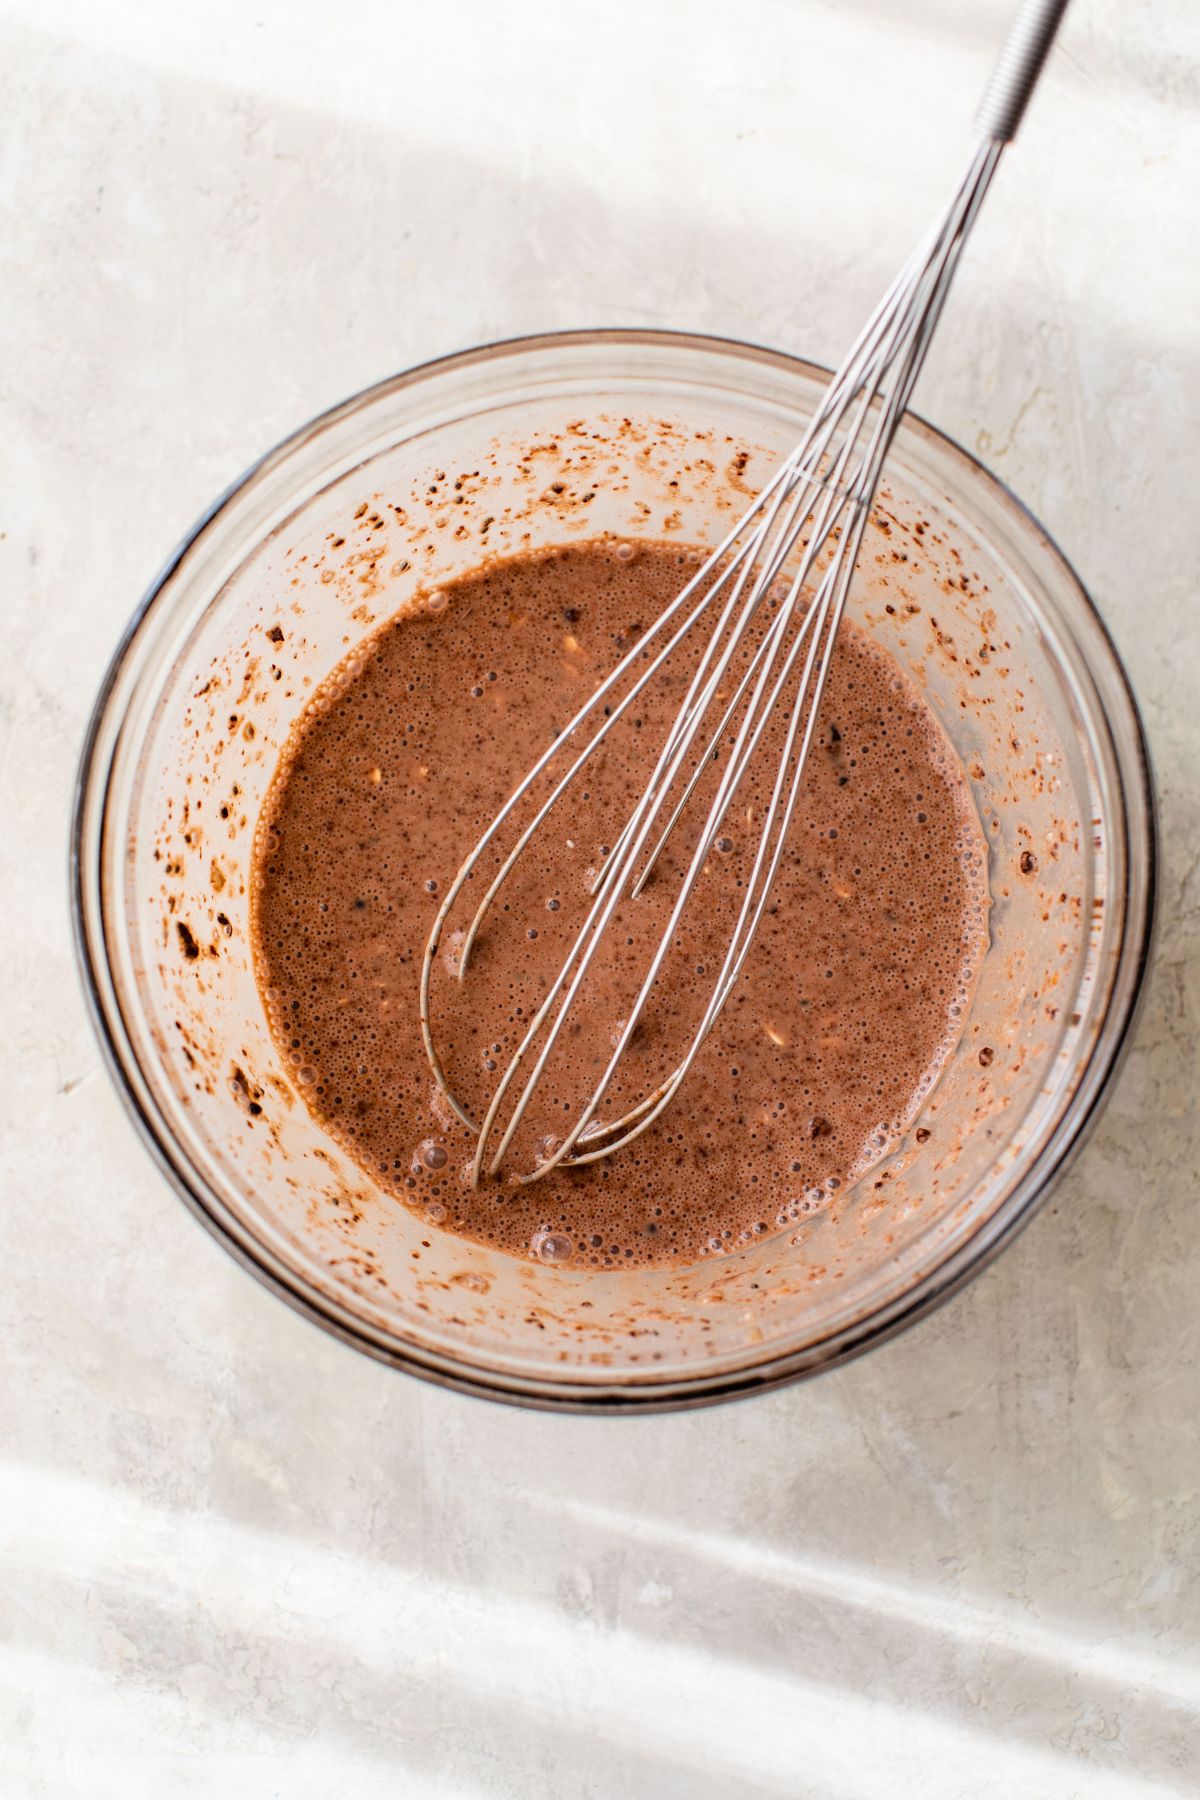 Whisking cocoa powder into overnight oats in a large bowl.